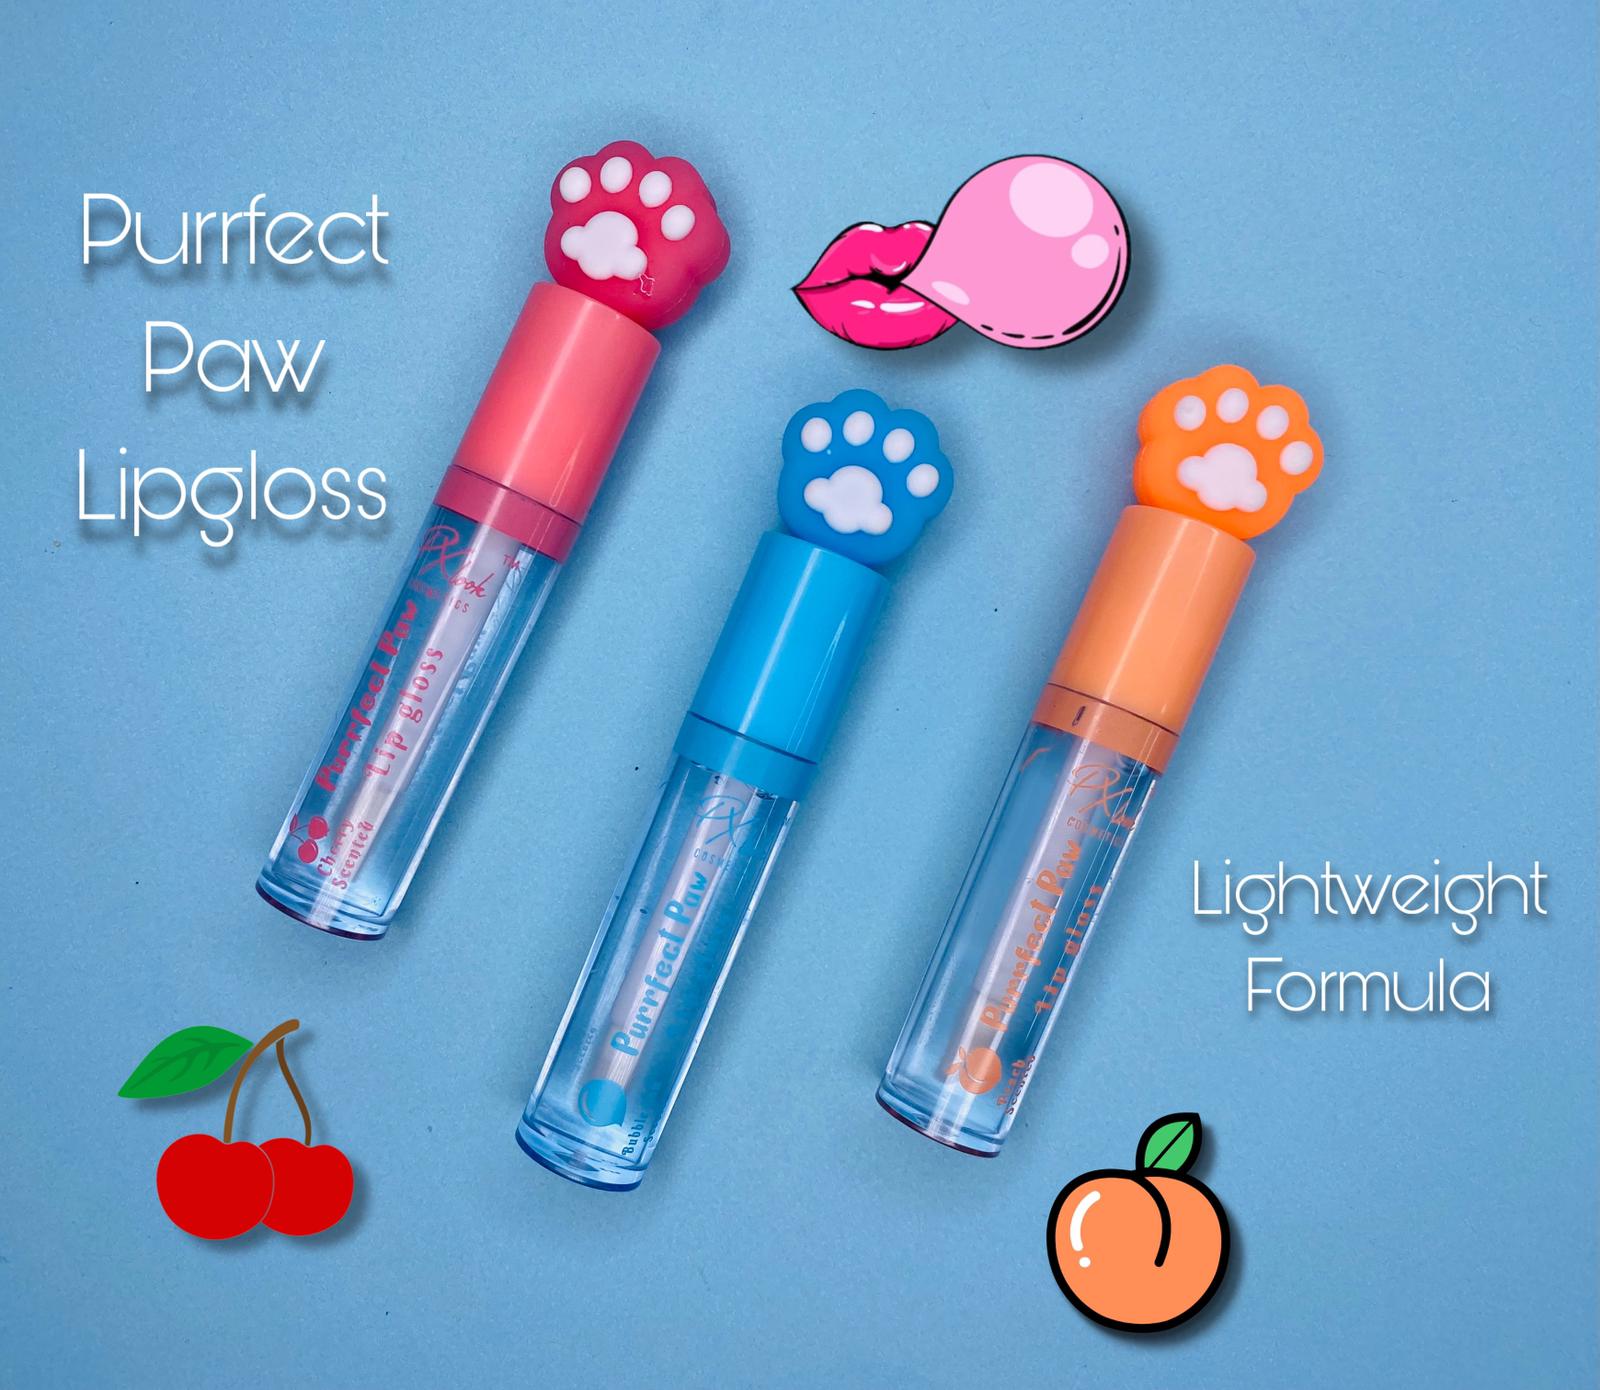 PxLook Purrfect Paw Lipgloss